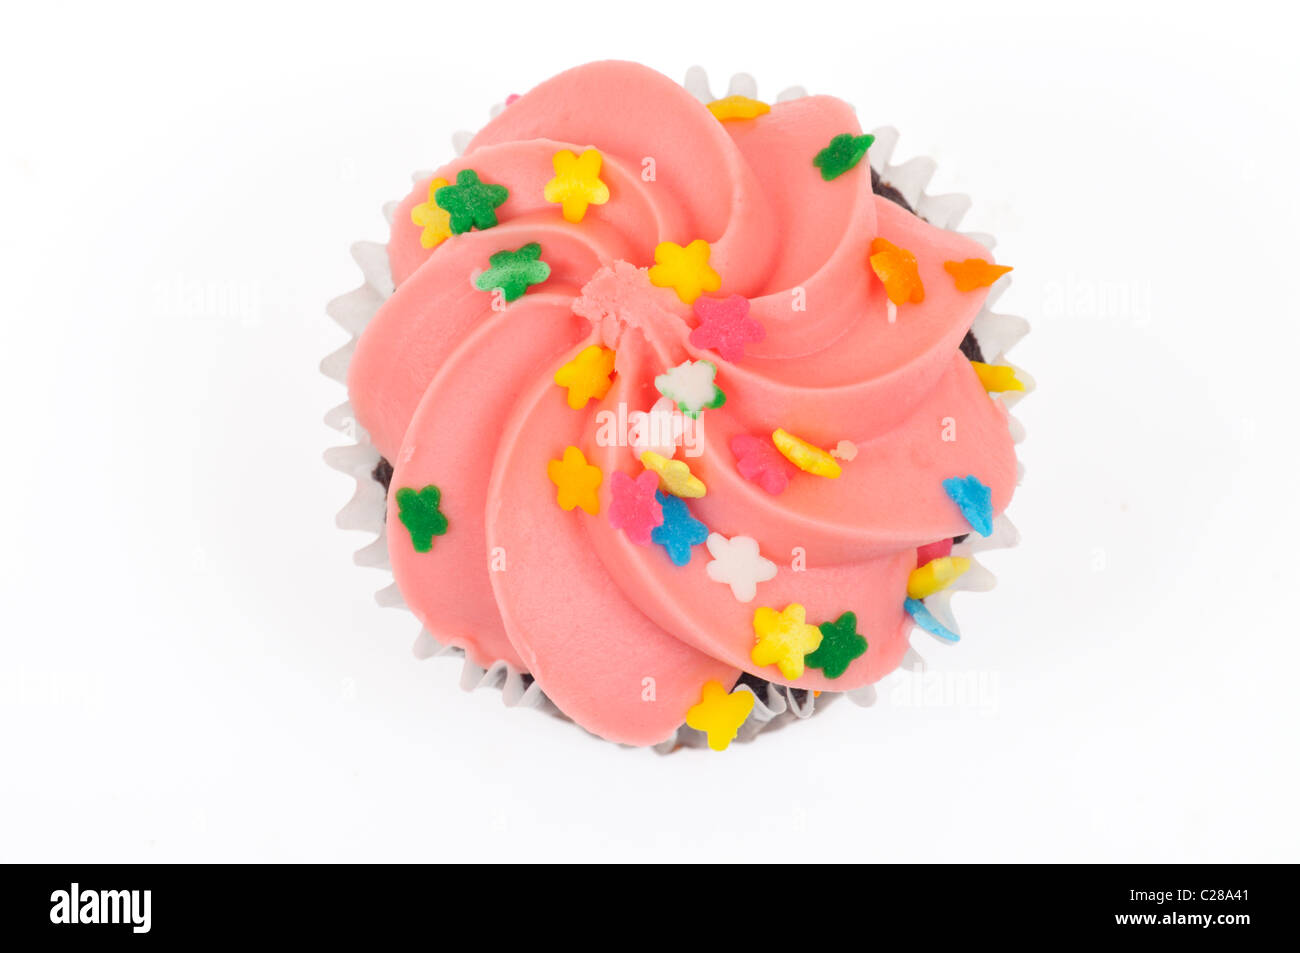 Chocolate cupcake with pink icing decorated with sprinkles from above on white background cut out. Stock Photo